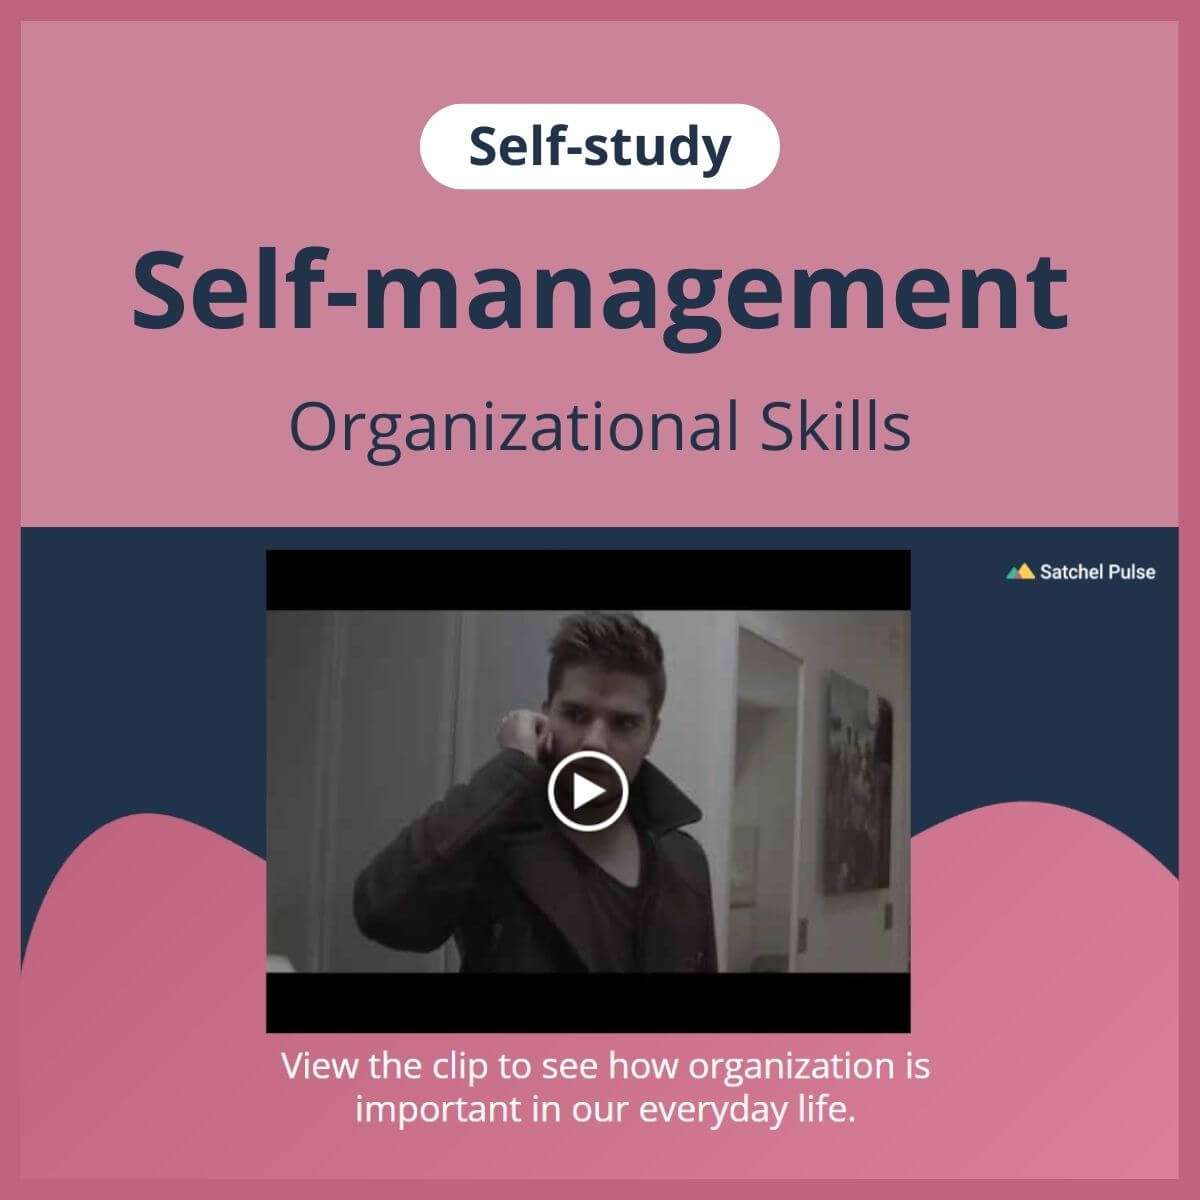 SEL self-study focusing on Organizational Skills to use in your classroom as one of your SEL activities for Self-Management